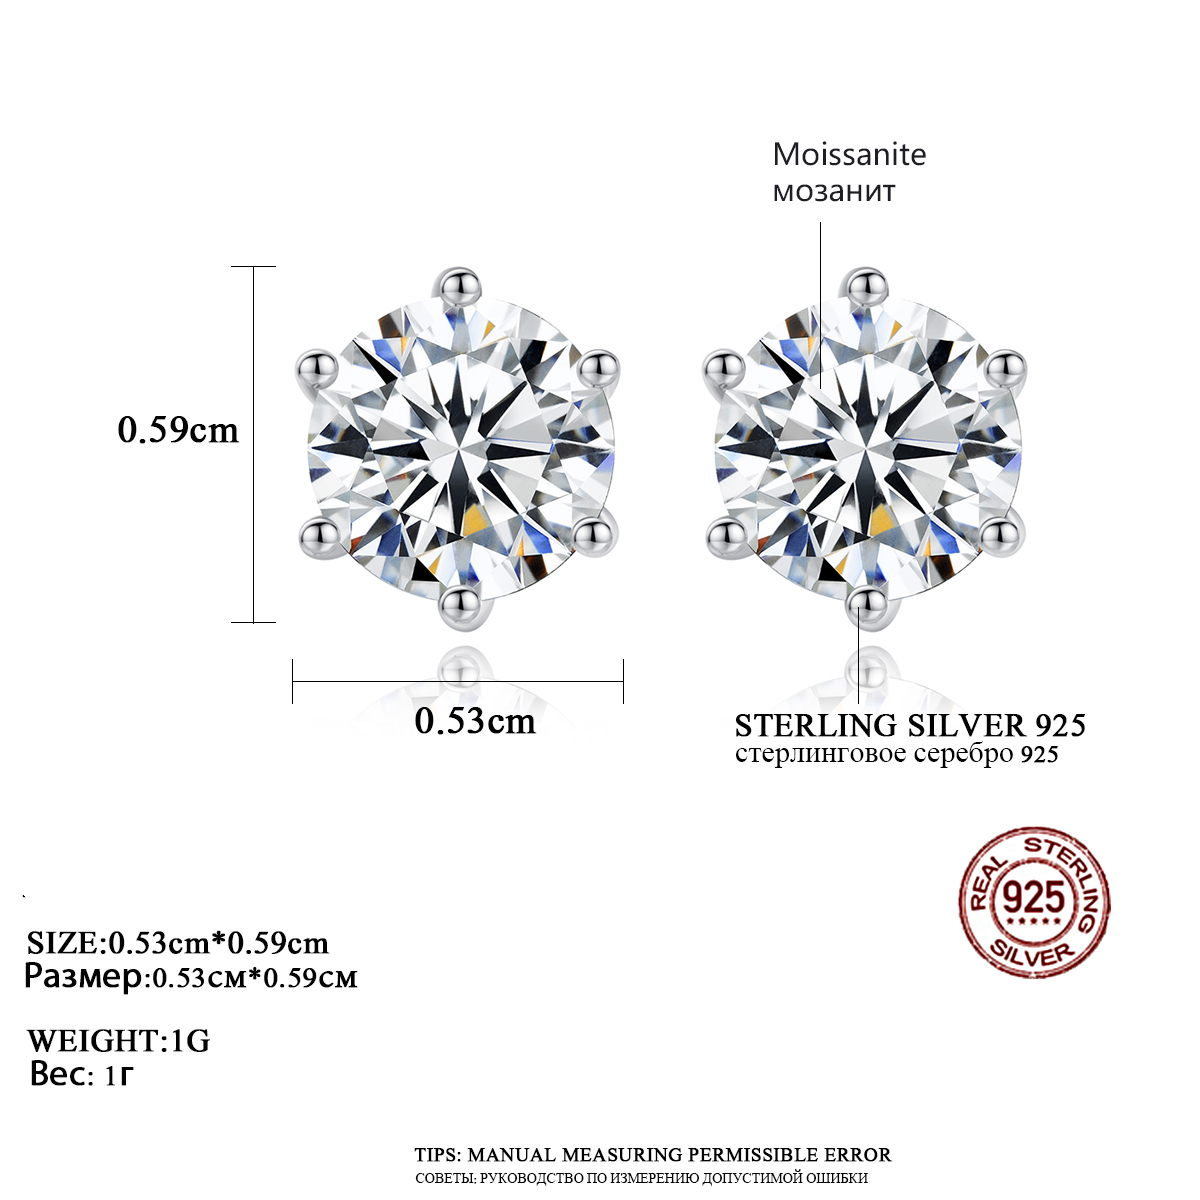 .5Ct Moissanite Diamond Classic Six Claw Sterling Silver Stud Earrings